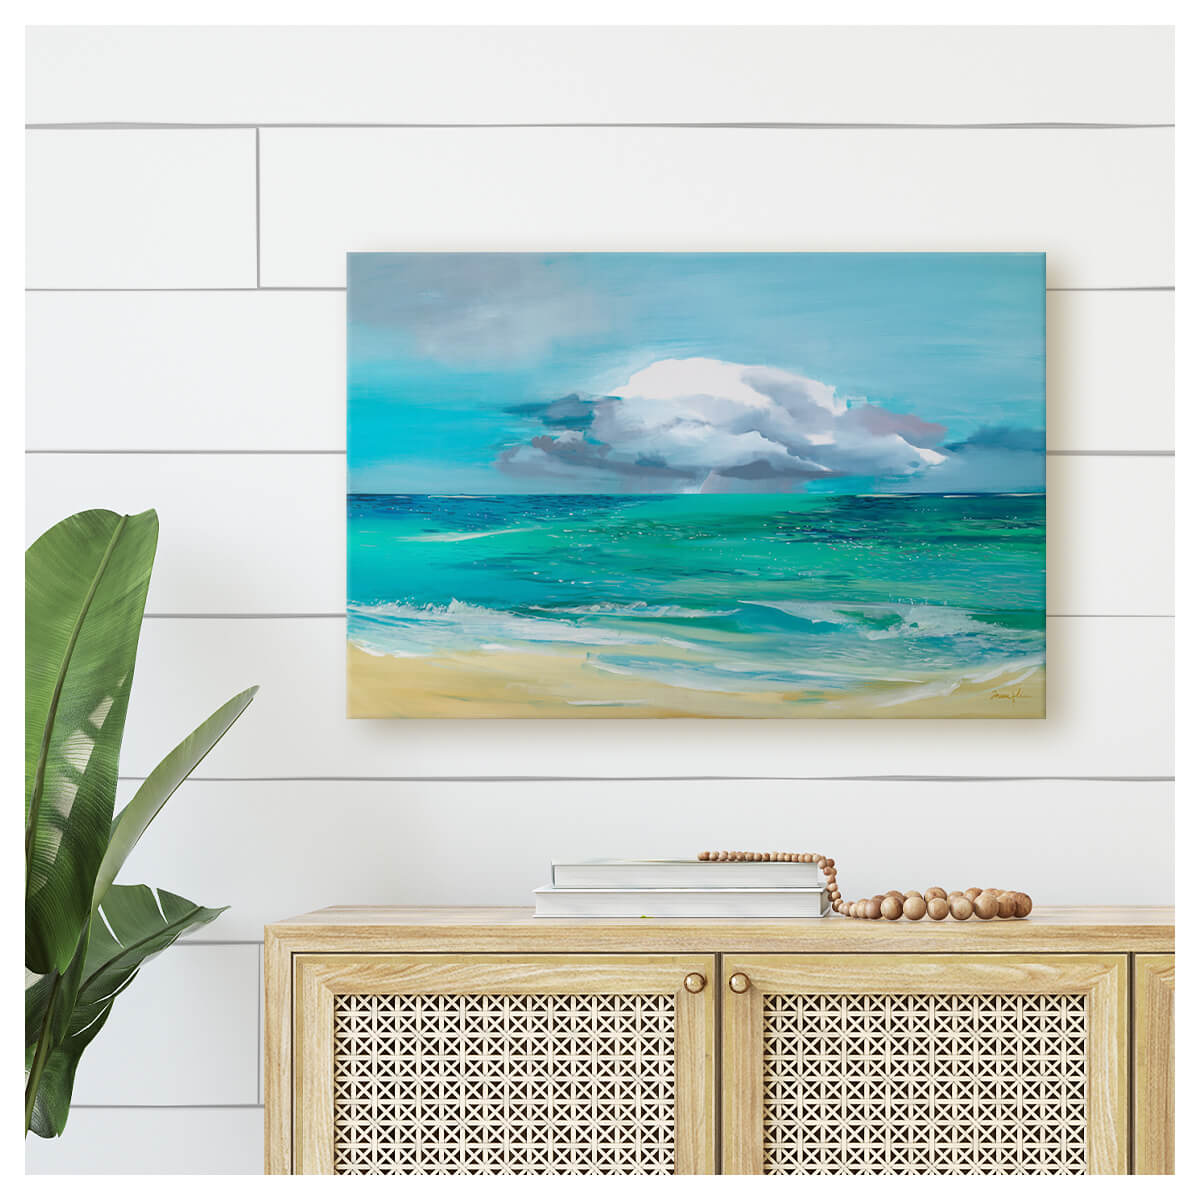 Blue toned canvas seascape print with a cloud in the distance by Hawaii artist Saumolia Puapuaga